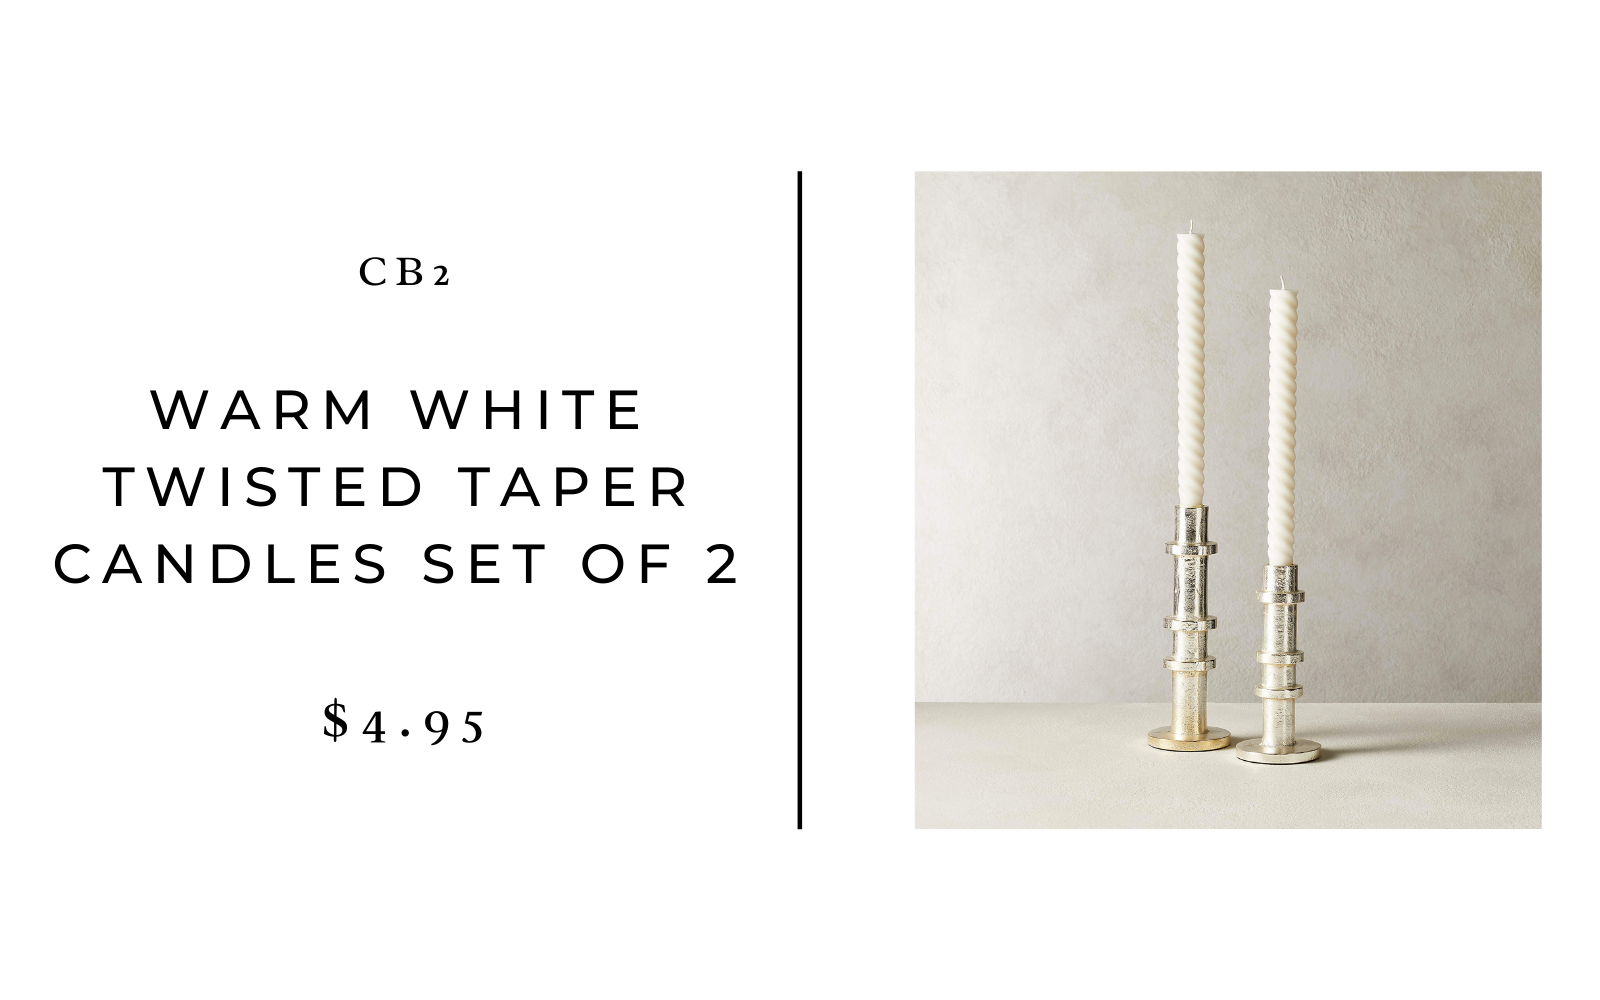 CB2 Warm White Twisted Taper Candles, Set of 2